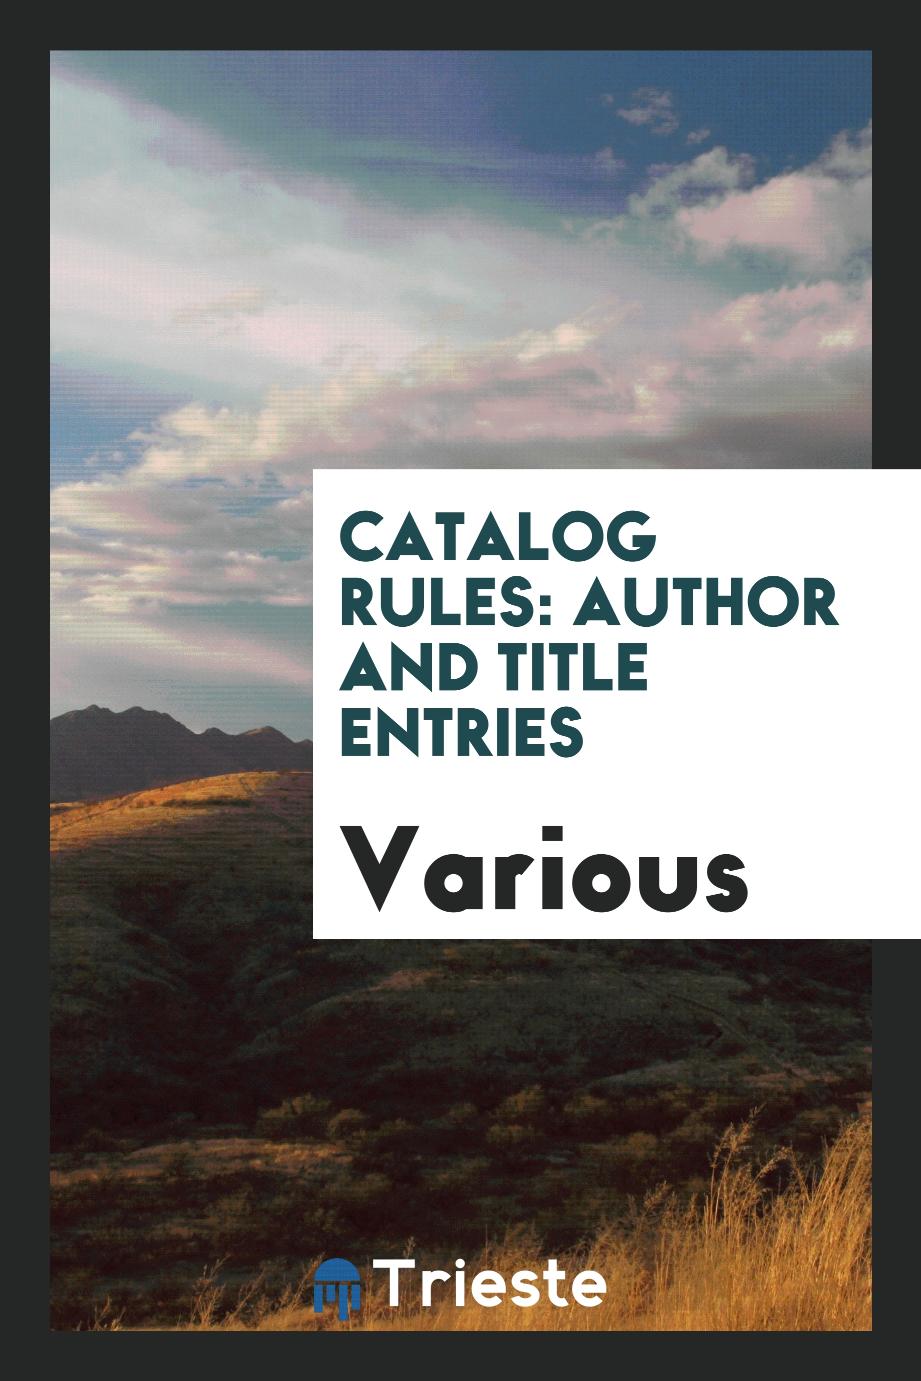 Catalog Rules: Author and Title Entries